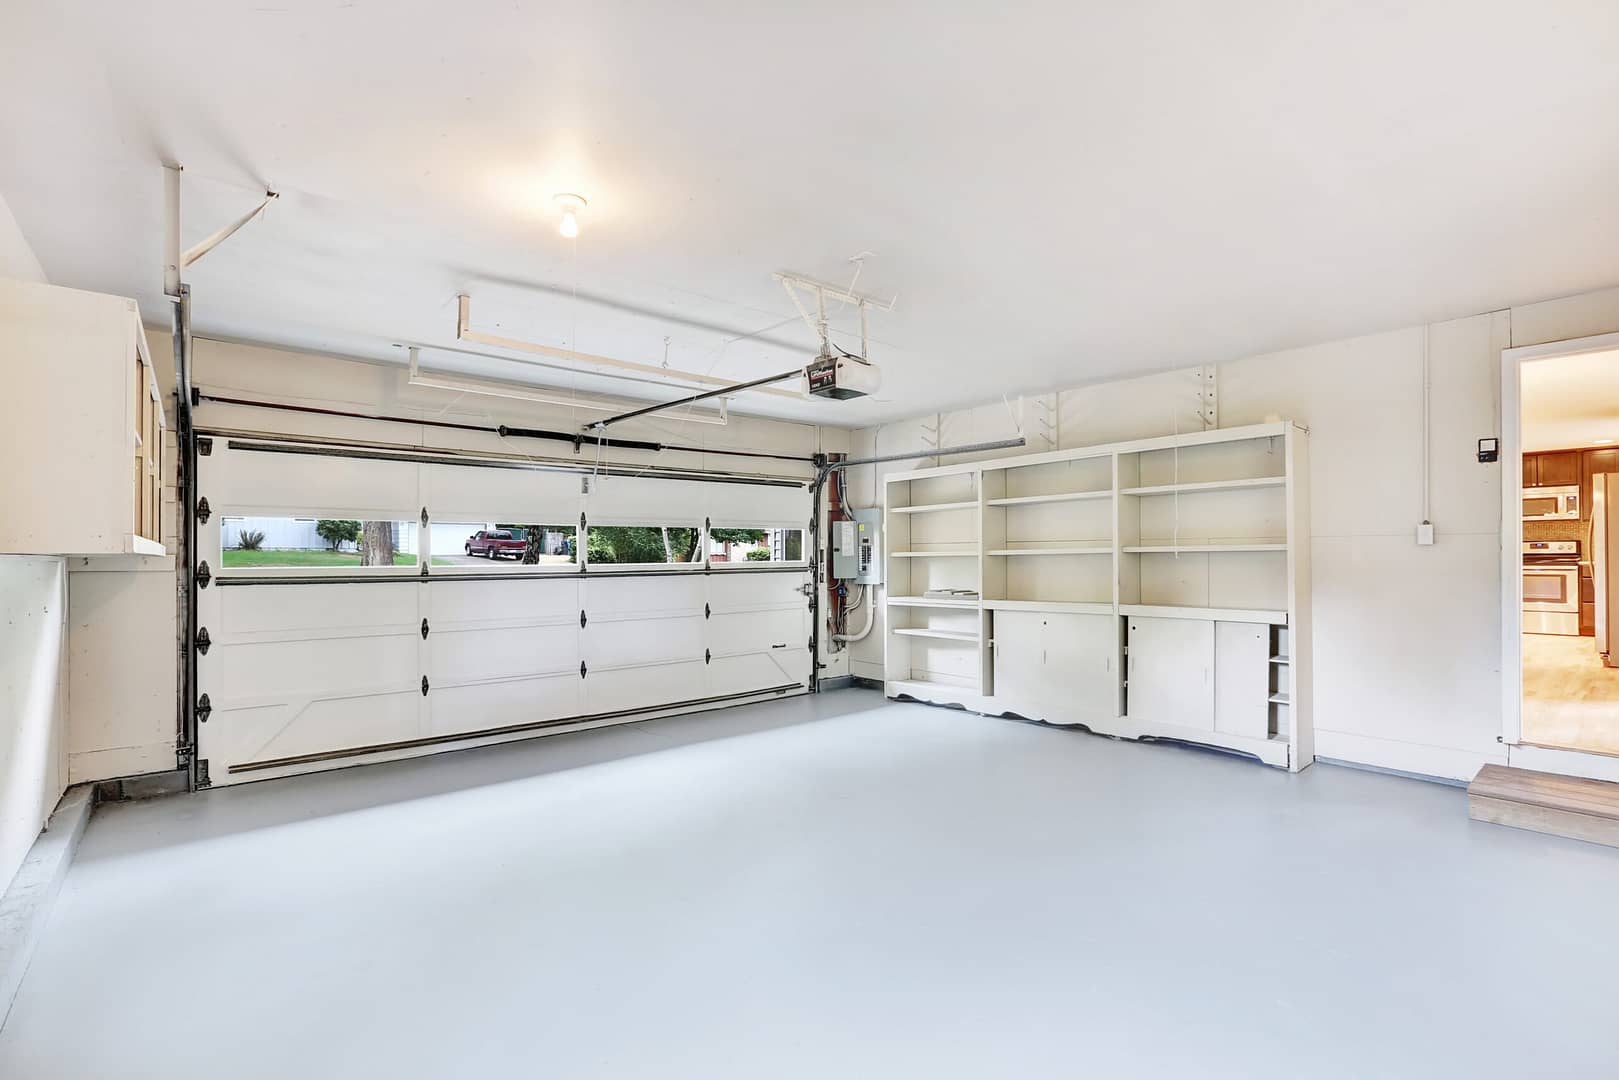 Uncluttered and spacious garage interior in a typical american home, characterized by neatly organized storage shelves and open floor space.